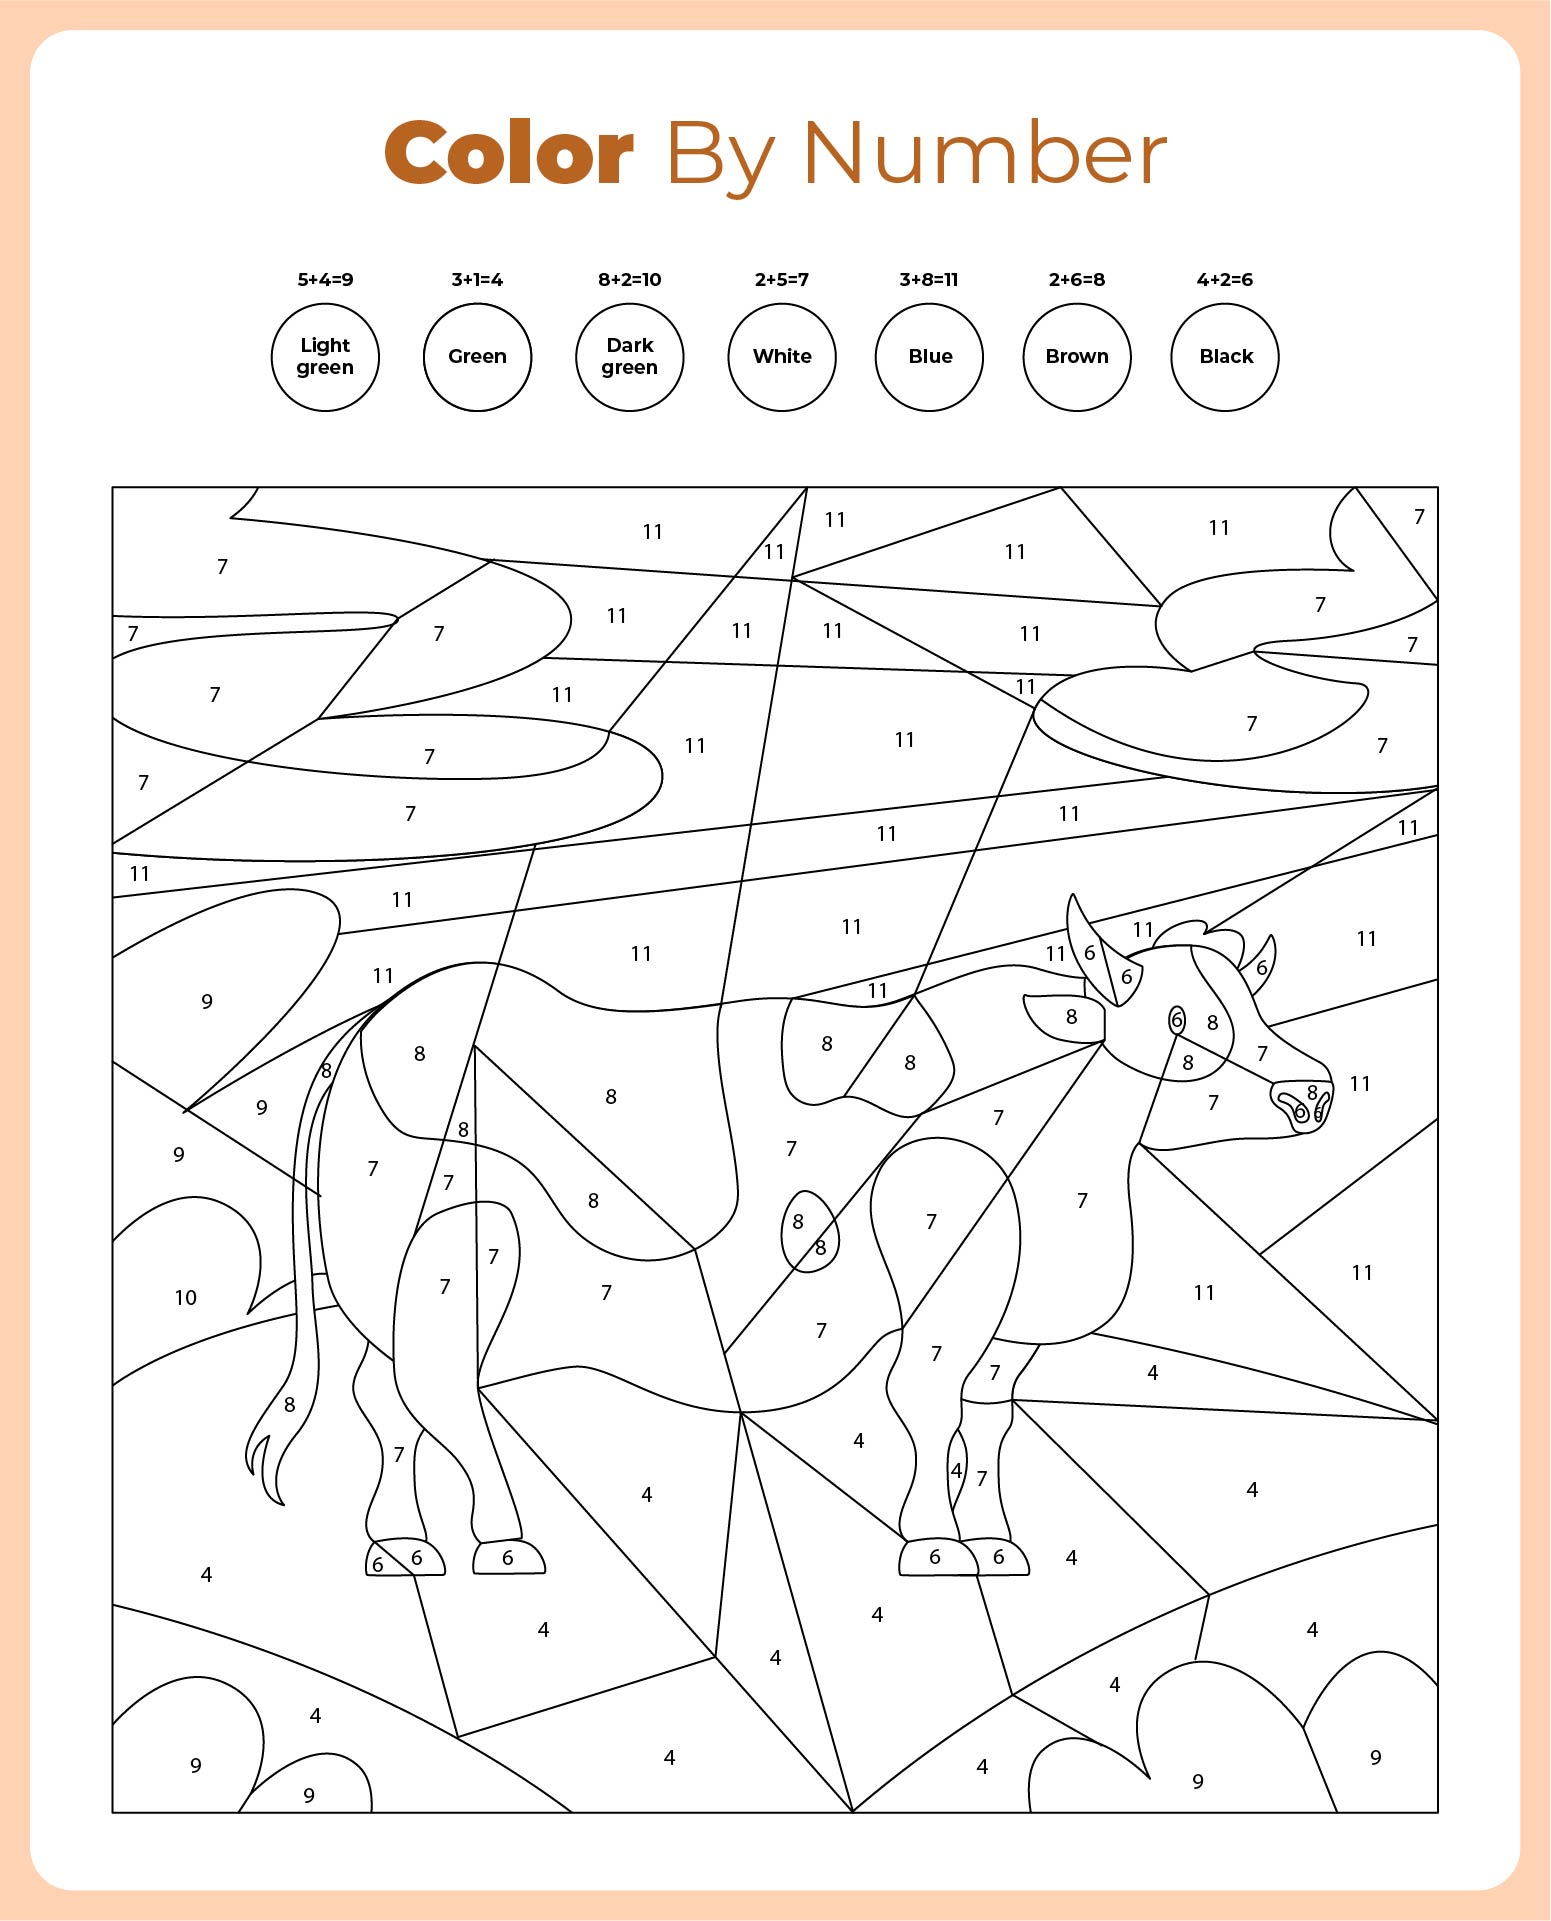 Hard Color by Number Coloring Pages Printable